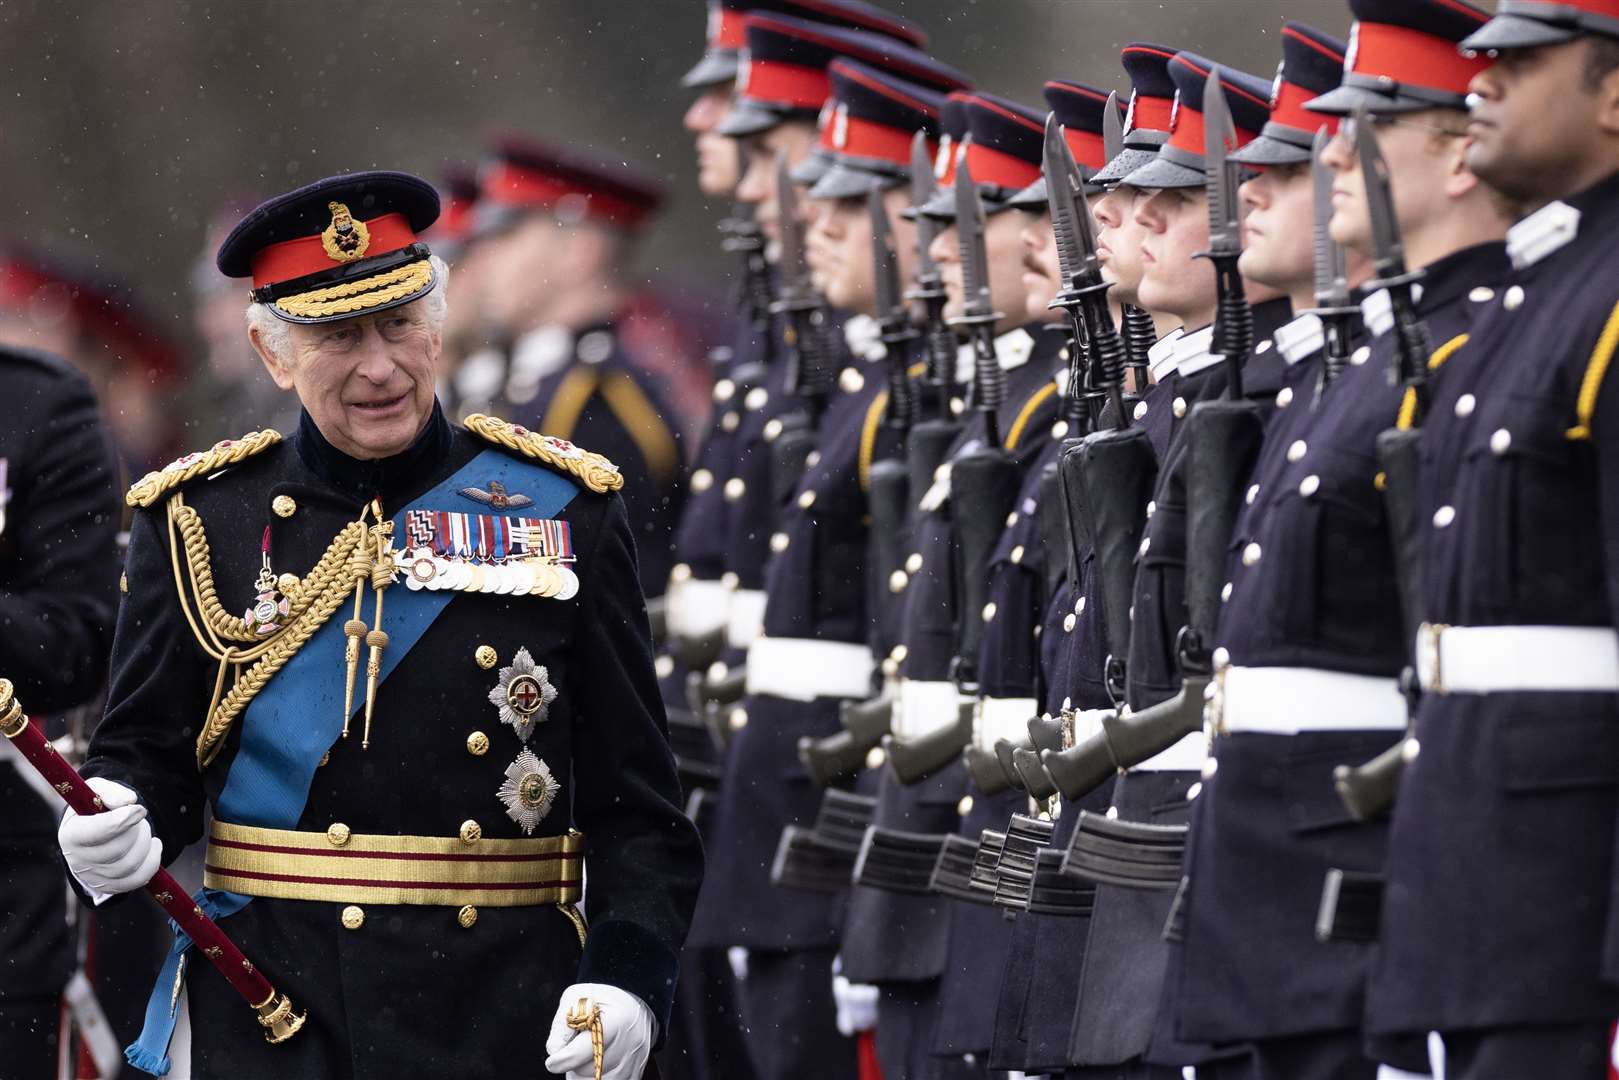 The King inspects officer cadets on parade during the 200th Sovereign’s Parade at the Royal Military Academy Sandhurst in April (Dan Kitwood/PA)